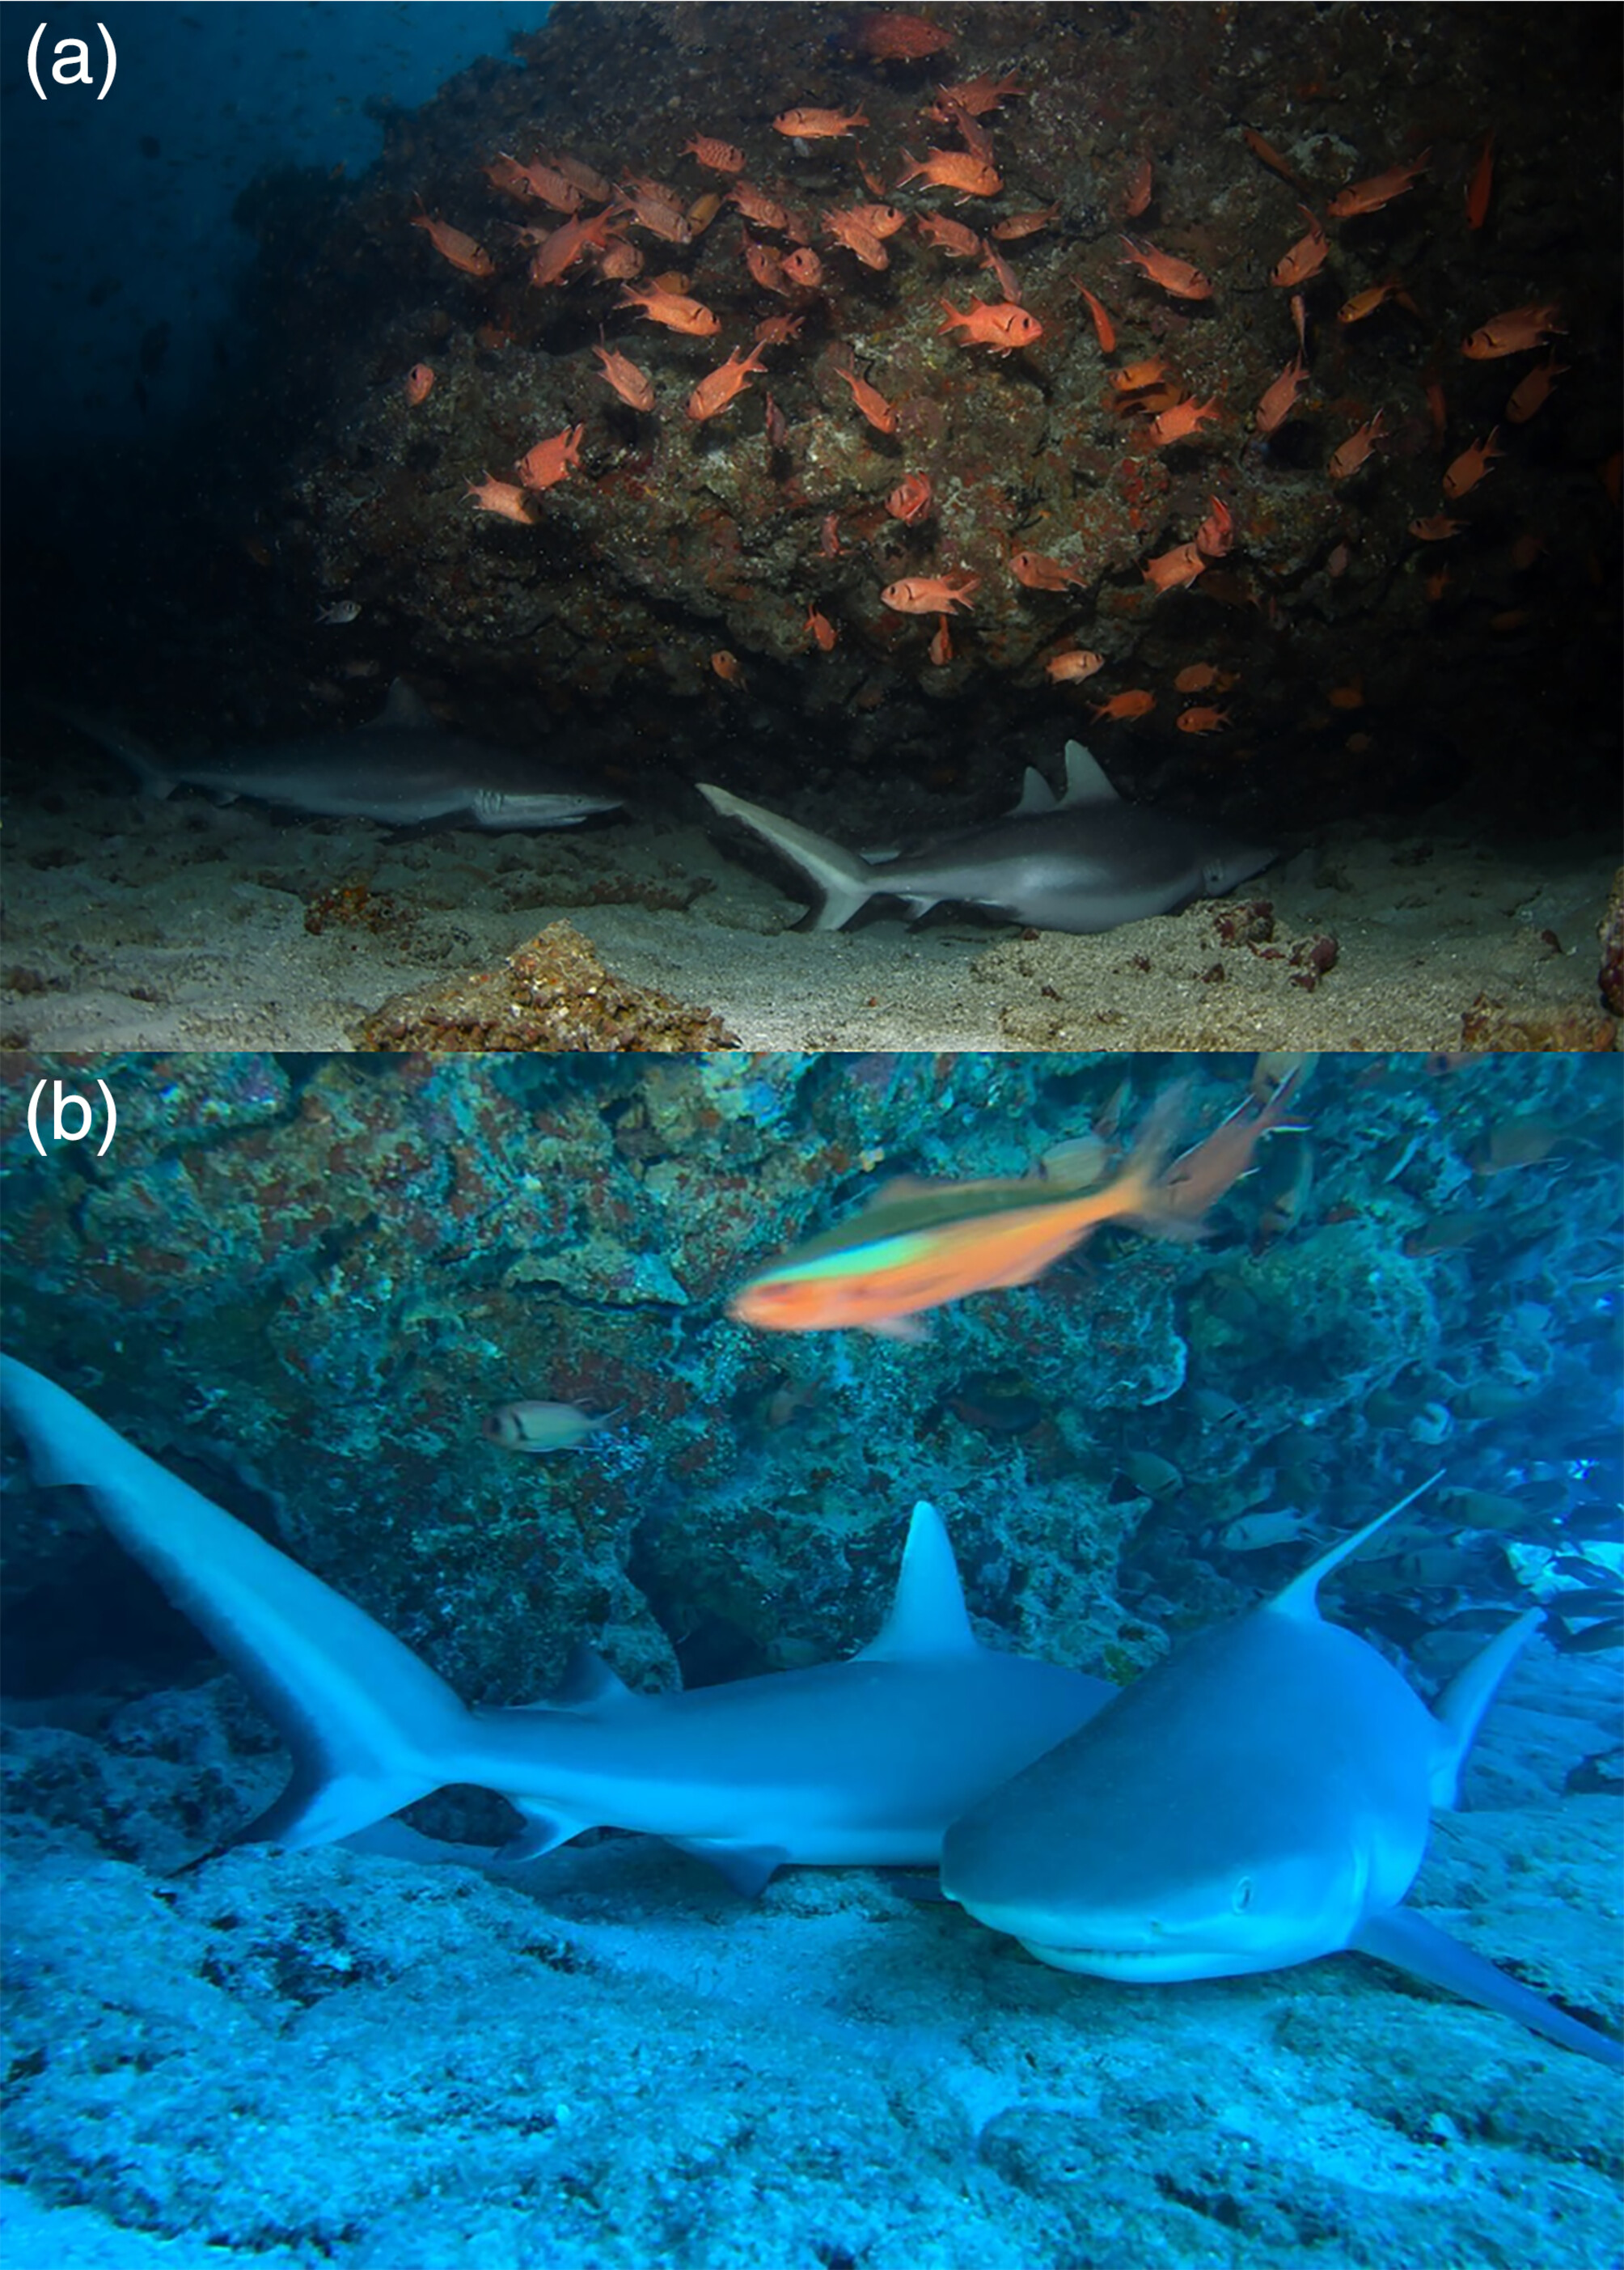 two underwater photographs presented in a vertical stack. the top photo, labelled (a), shows in its bottom third, two sharks on the seafloor below an overhanging reef ledge, and in the top two thirds, a school of medium sized orange fish swimming around. the second photo, labelled (b), shows two sharks in the center third of the image, resting side-by-side on a rocky seafloor below a rocky reef overhang, one facing the camera and the other with its tail towards the camera. a small orange fish with a green stripe is blurred in motion across the top third of the screen, while the sharks are not blurred.